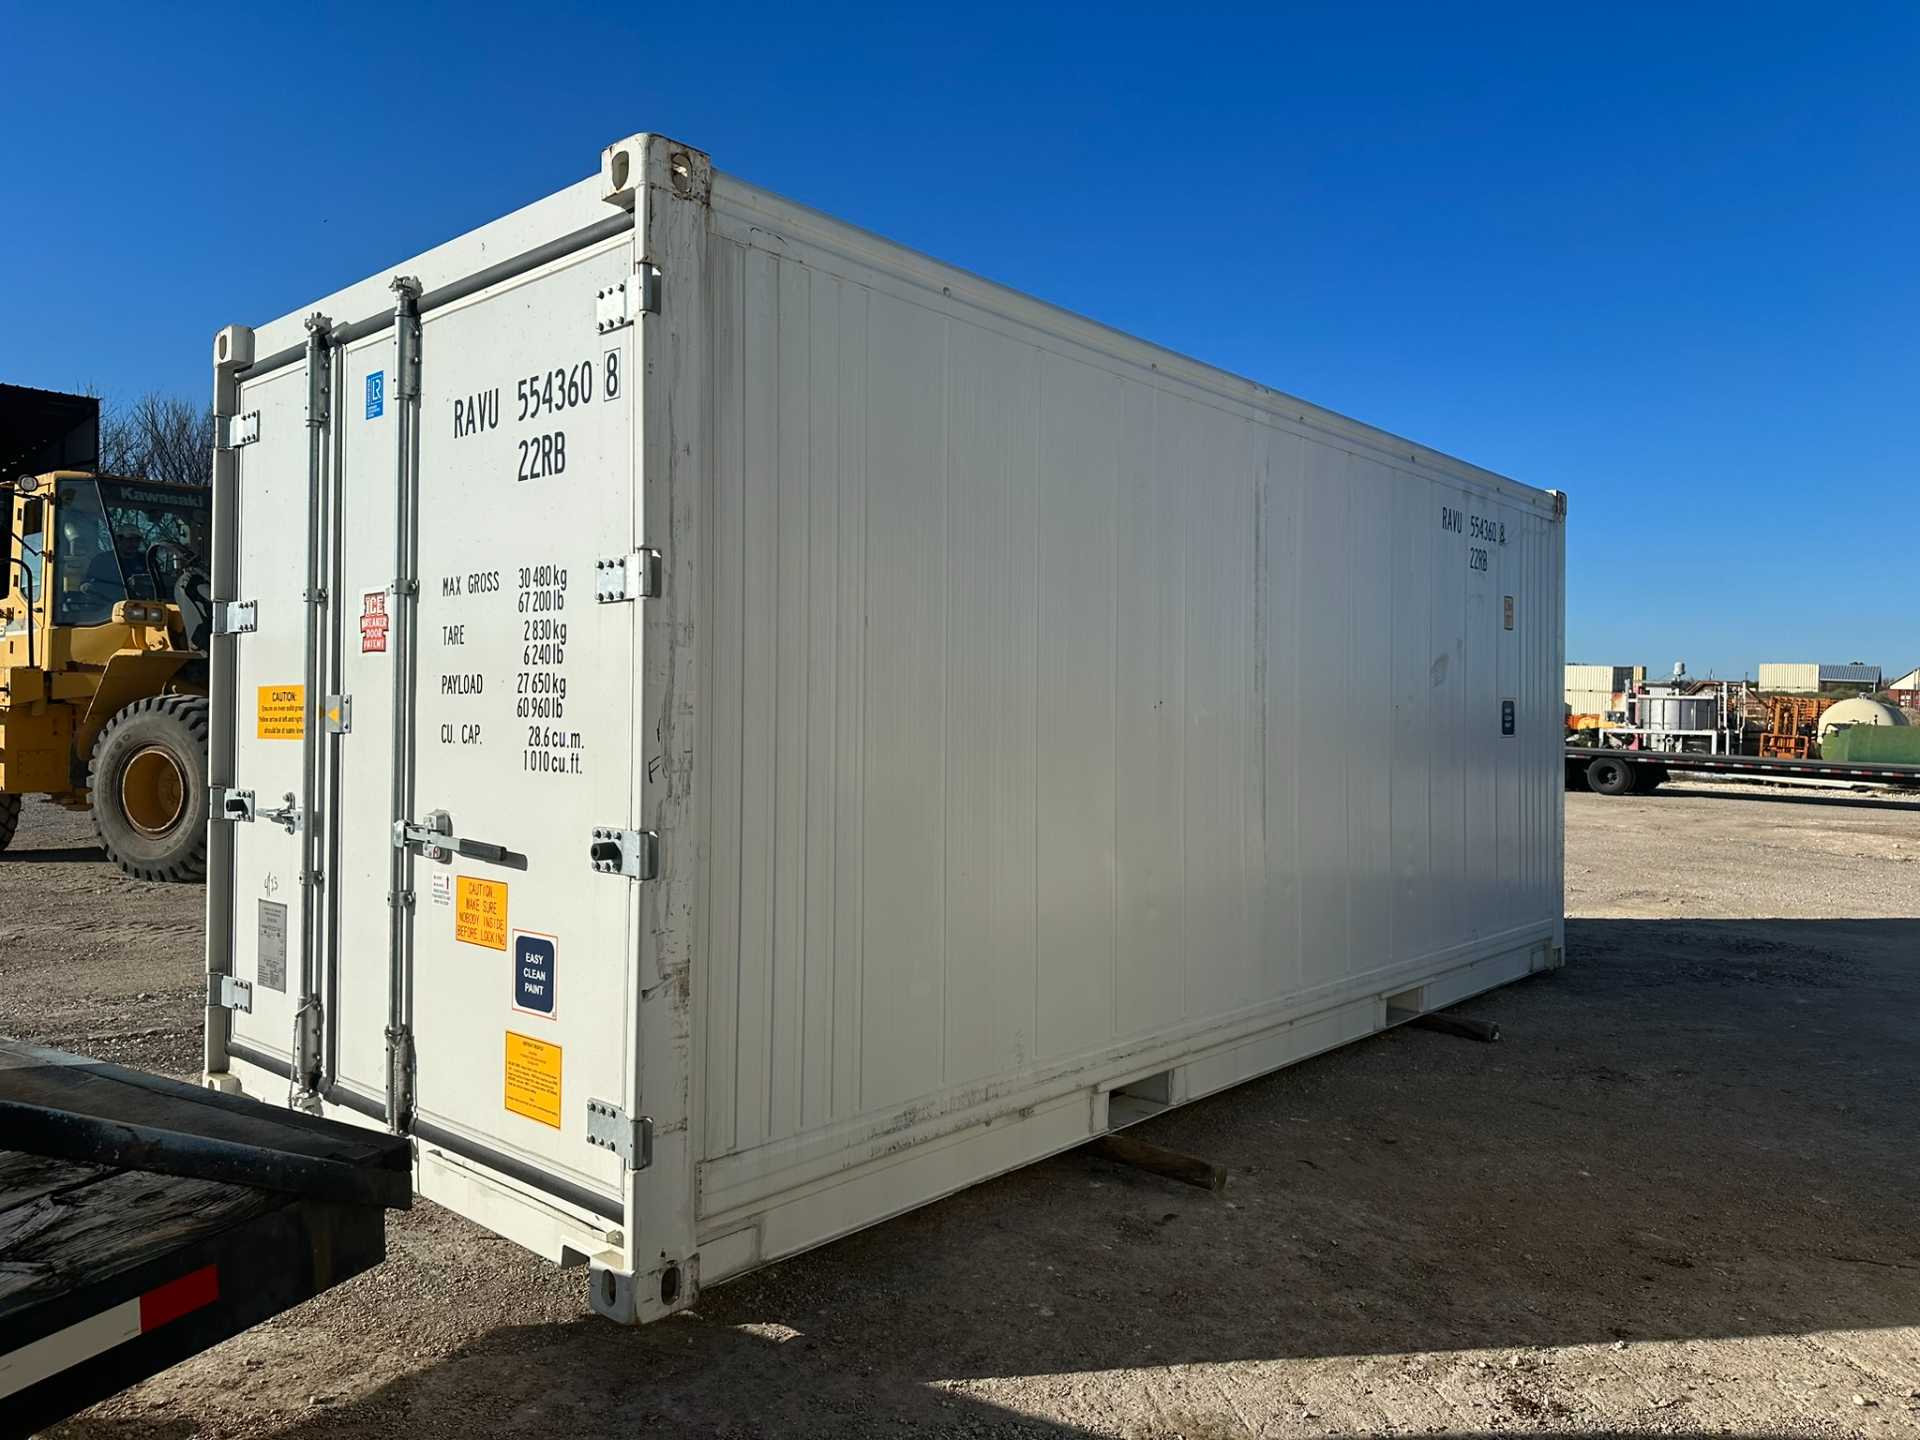 NEW (1 TRIP) 20FT THERMOKING MAGNUM PLUS REEFER CONTAINER W/THERMOKING WARRANTY